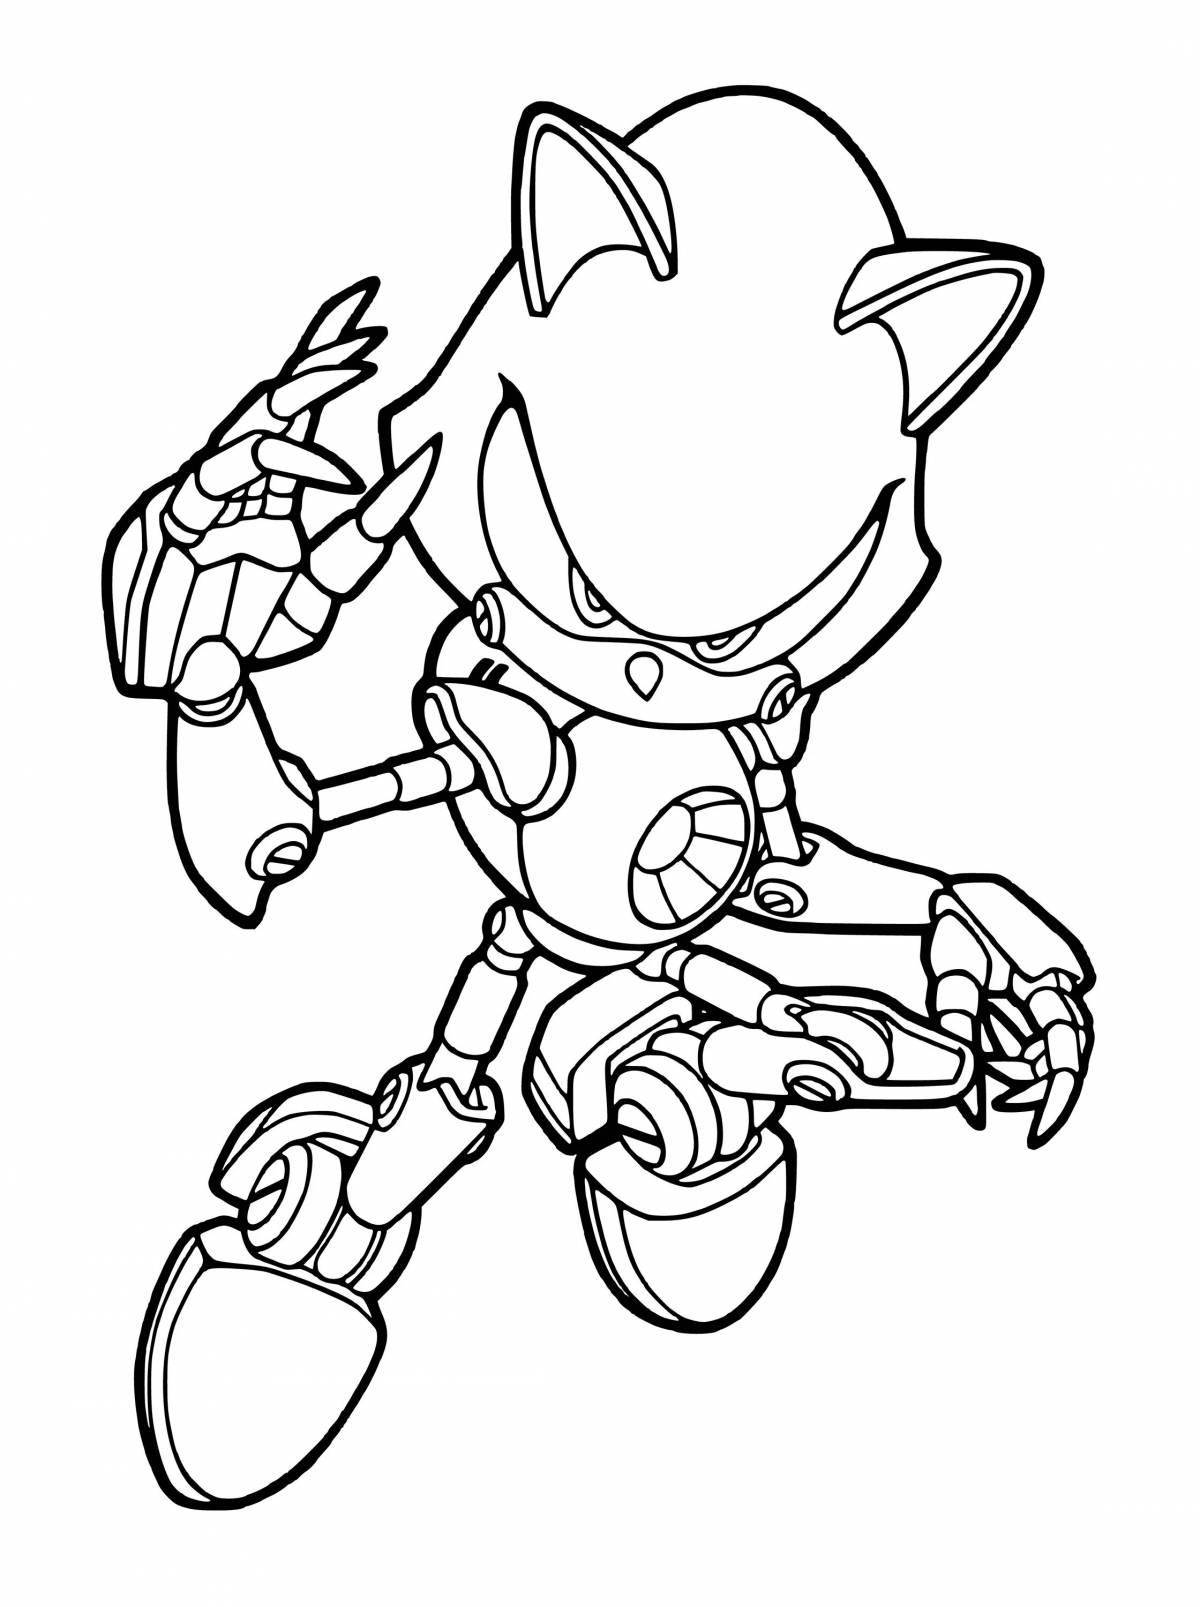 Colorful sonic coloring book for kids 5-6 years old